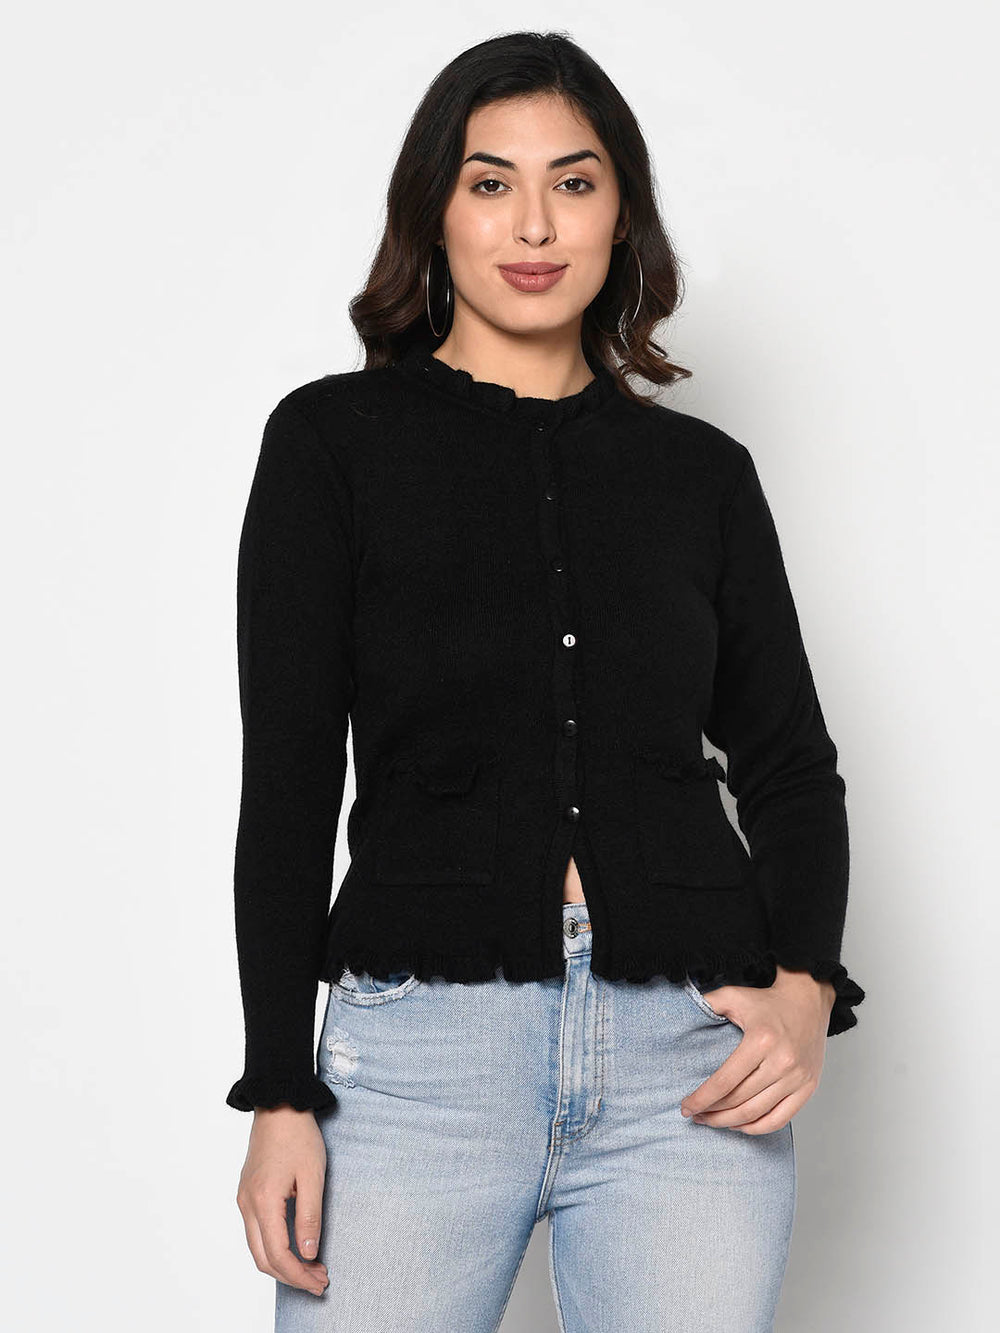 Black Cardigan With Pockets & Frill Detail